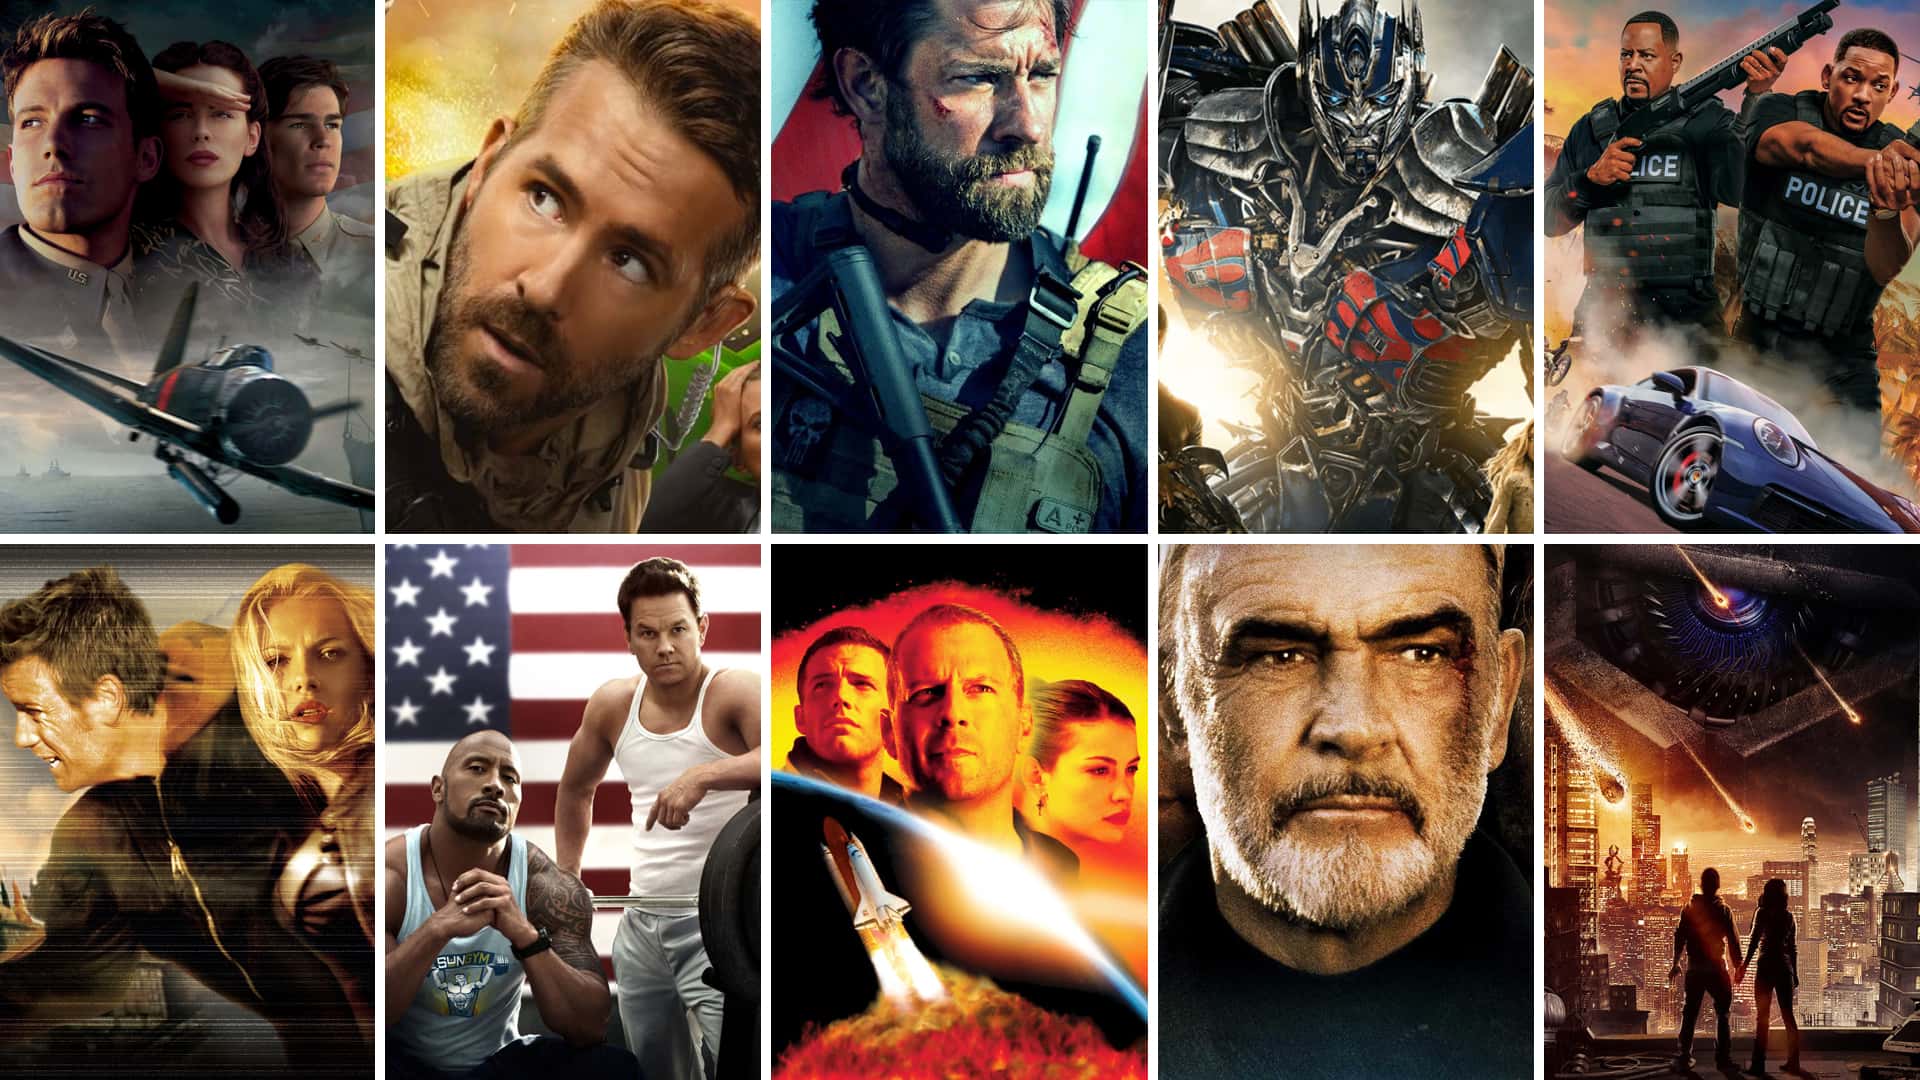 Michael Bay's Best Movies, Ranked from Worst to Best